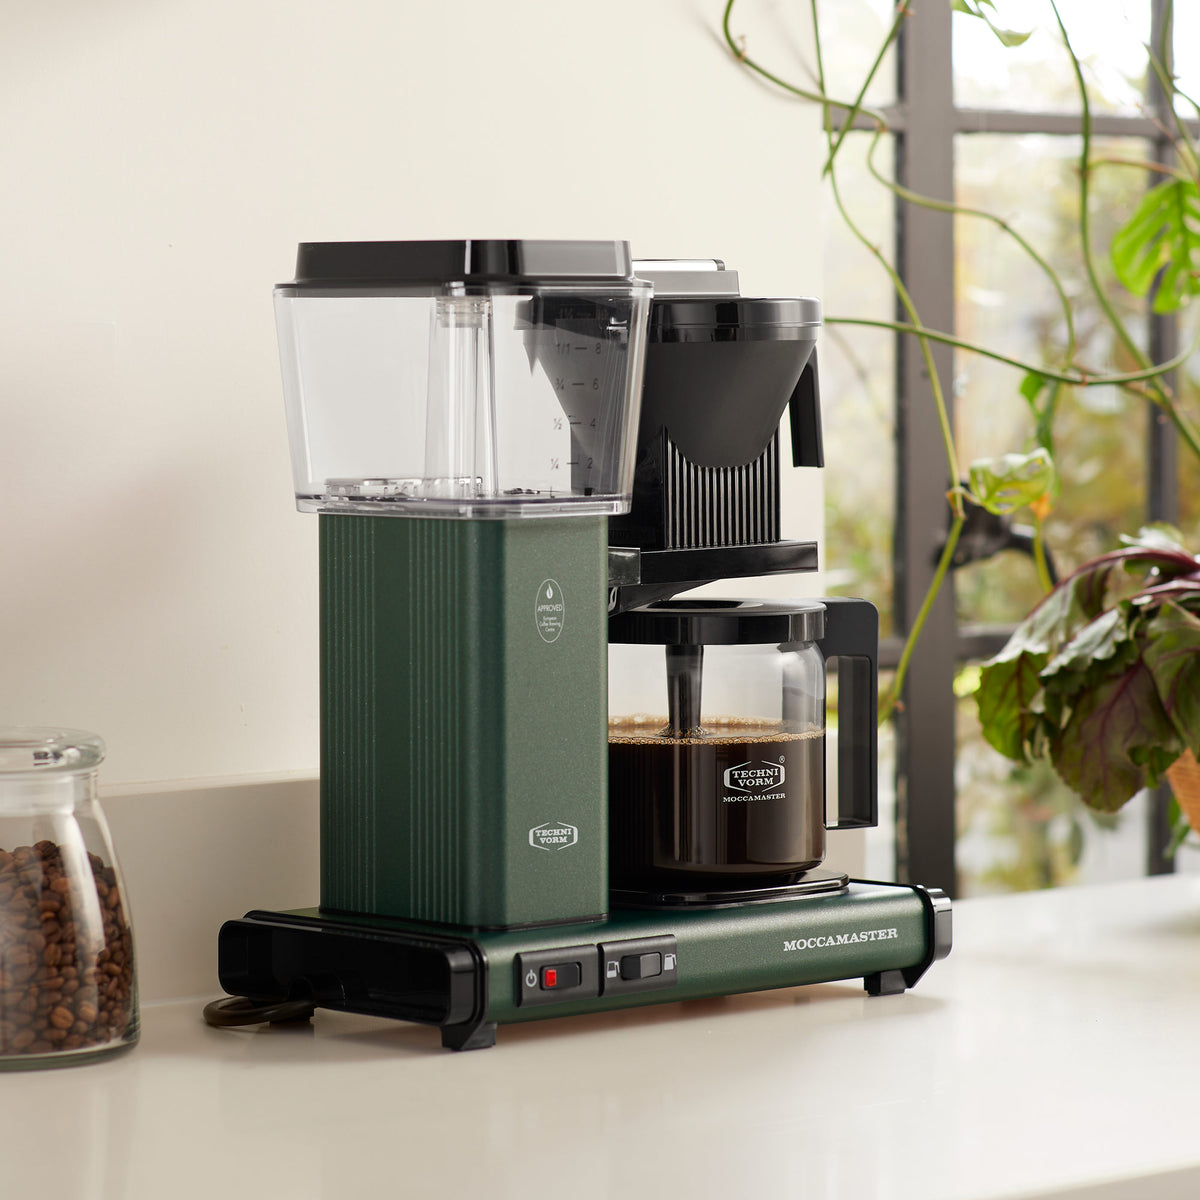 A green Moccamaster coffee machine on a counter, with a glass carafe, water tank, and adjacent coffee beans.